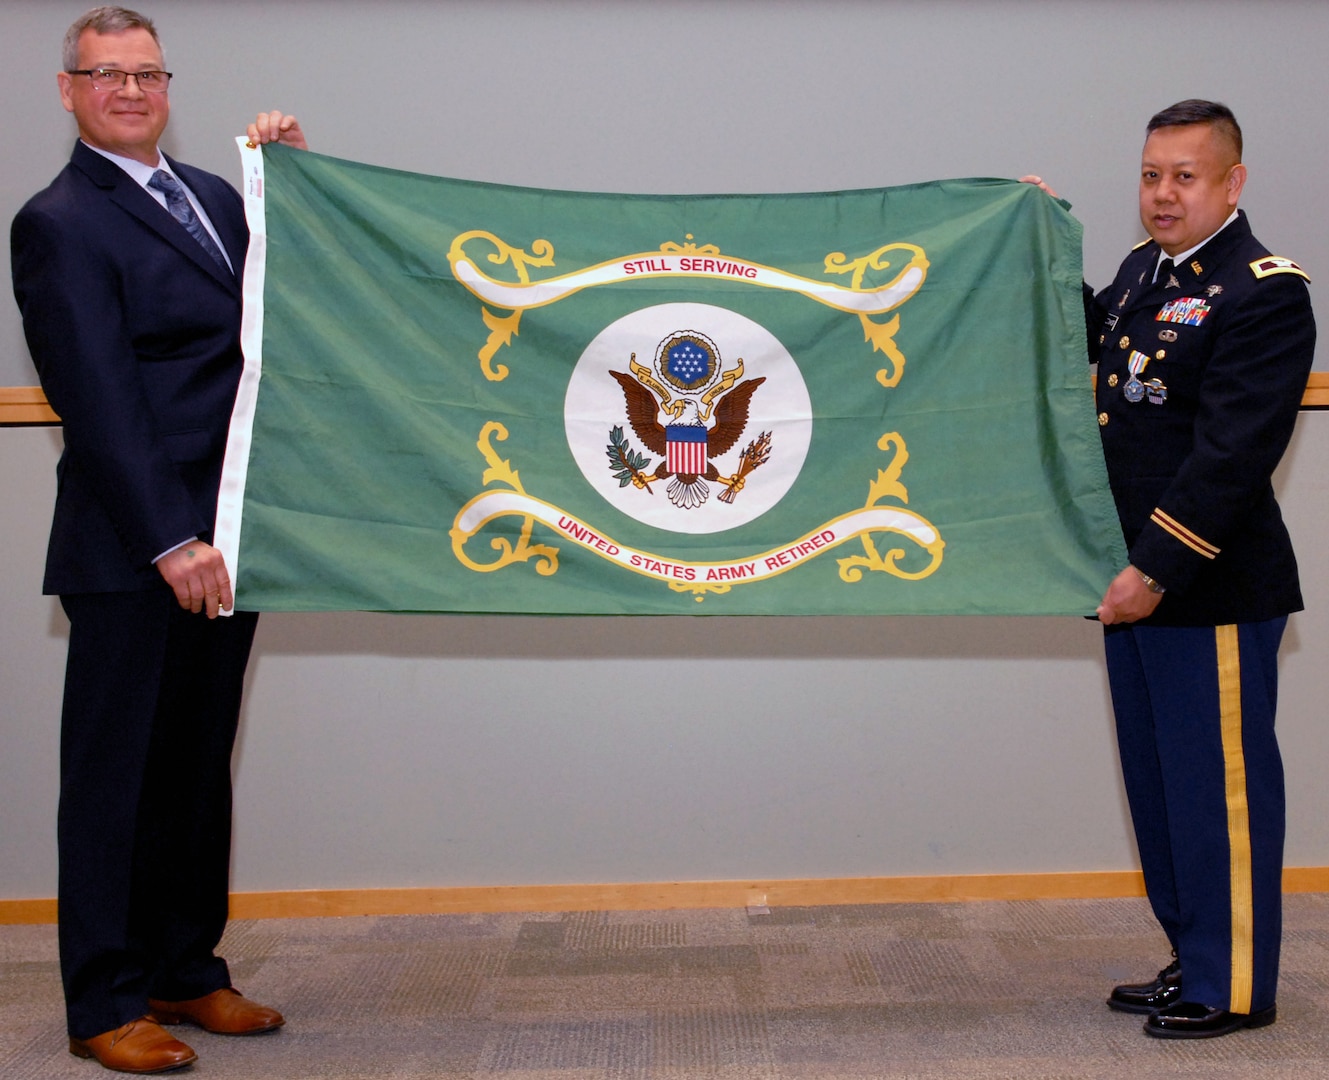 Army Col. Alex Zotomayor, Medical supply chain director, right, poses with Richard Ellis, DLA Troop Support deputy commander, left, during a retirement ceremony at DLA Troop Support in Philadelphia, June 13, 2018.